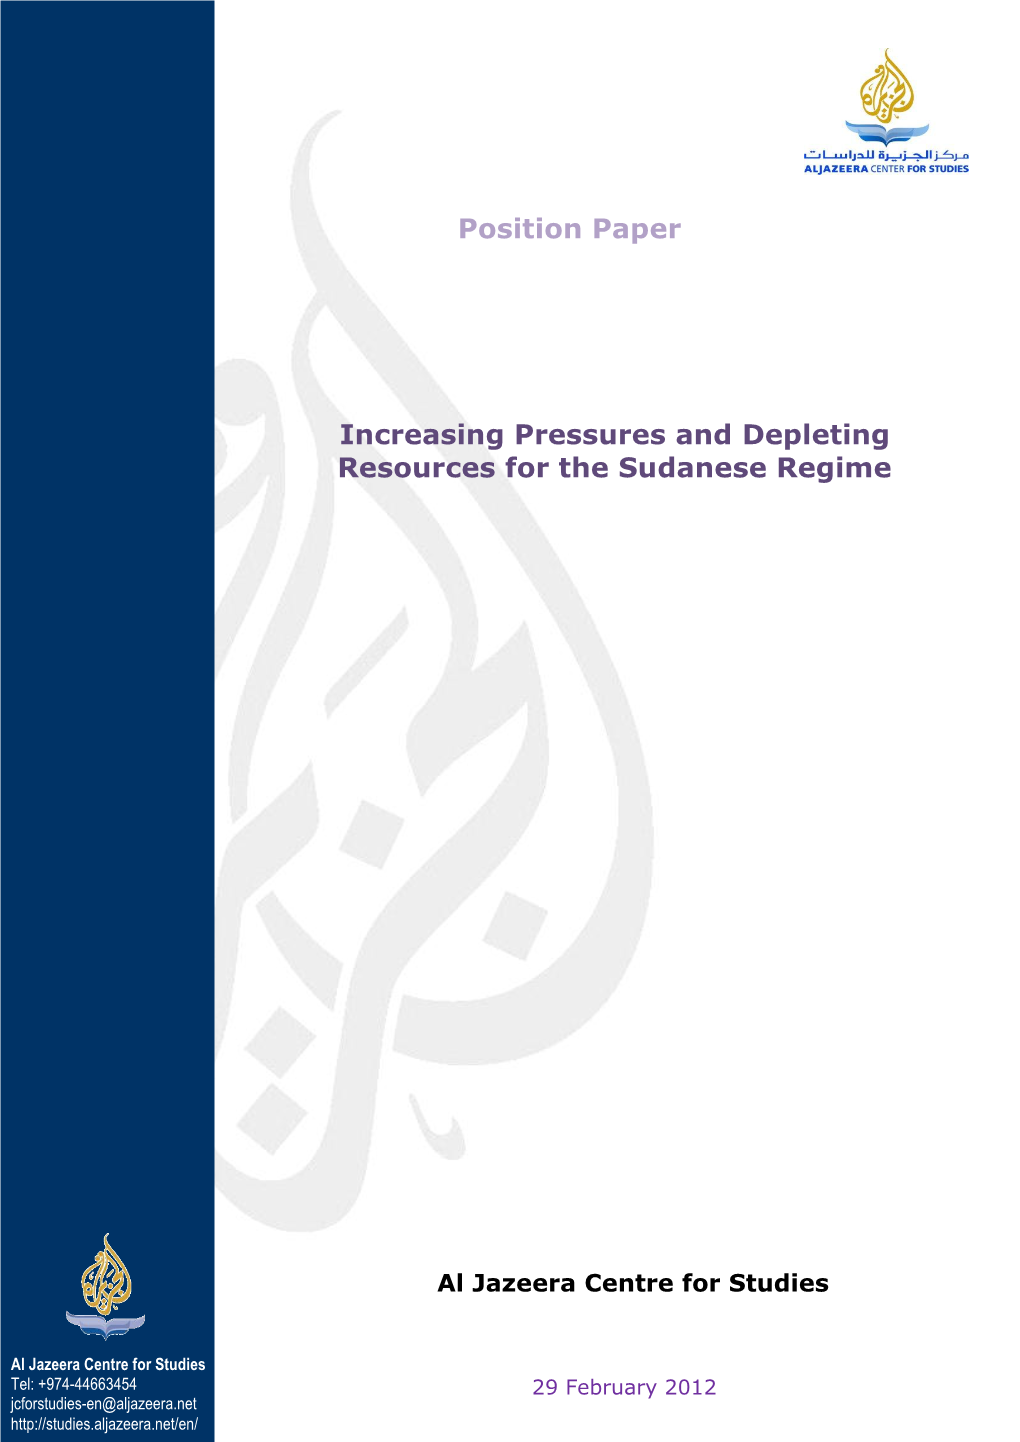 Position Paper Increasing Pressures and Depleting Resources for The